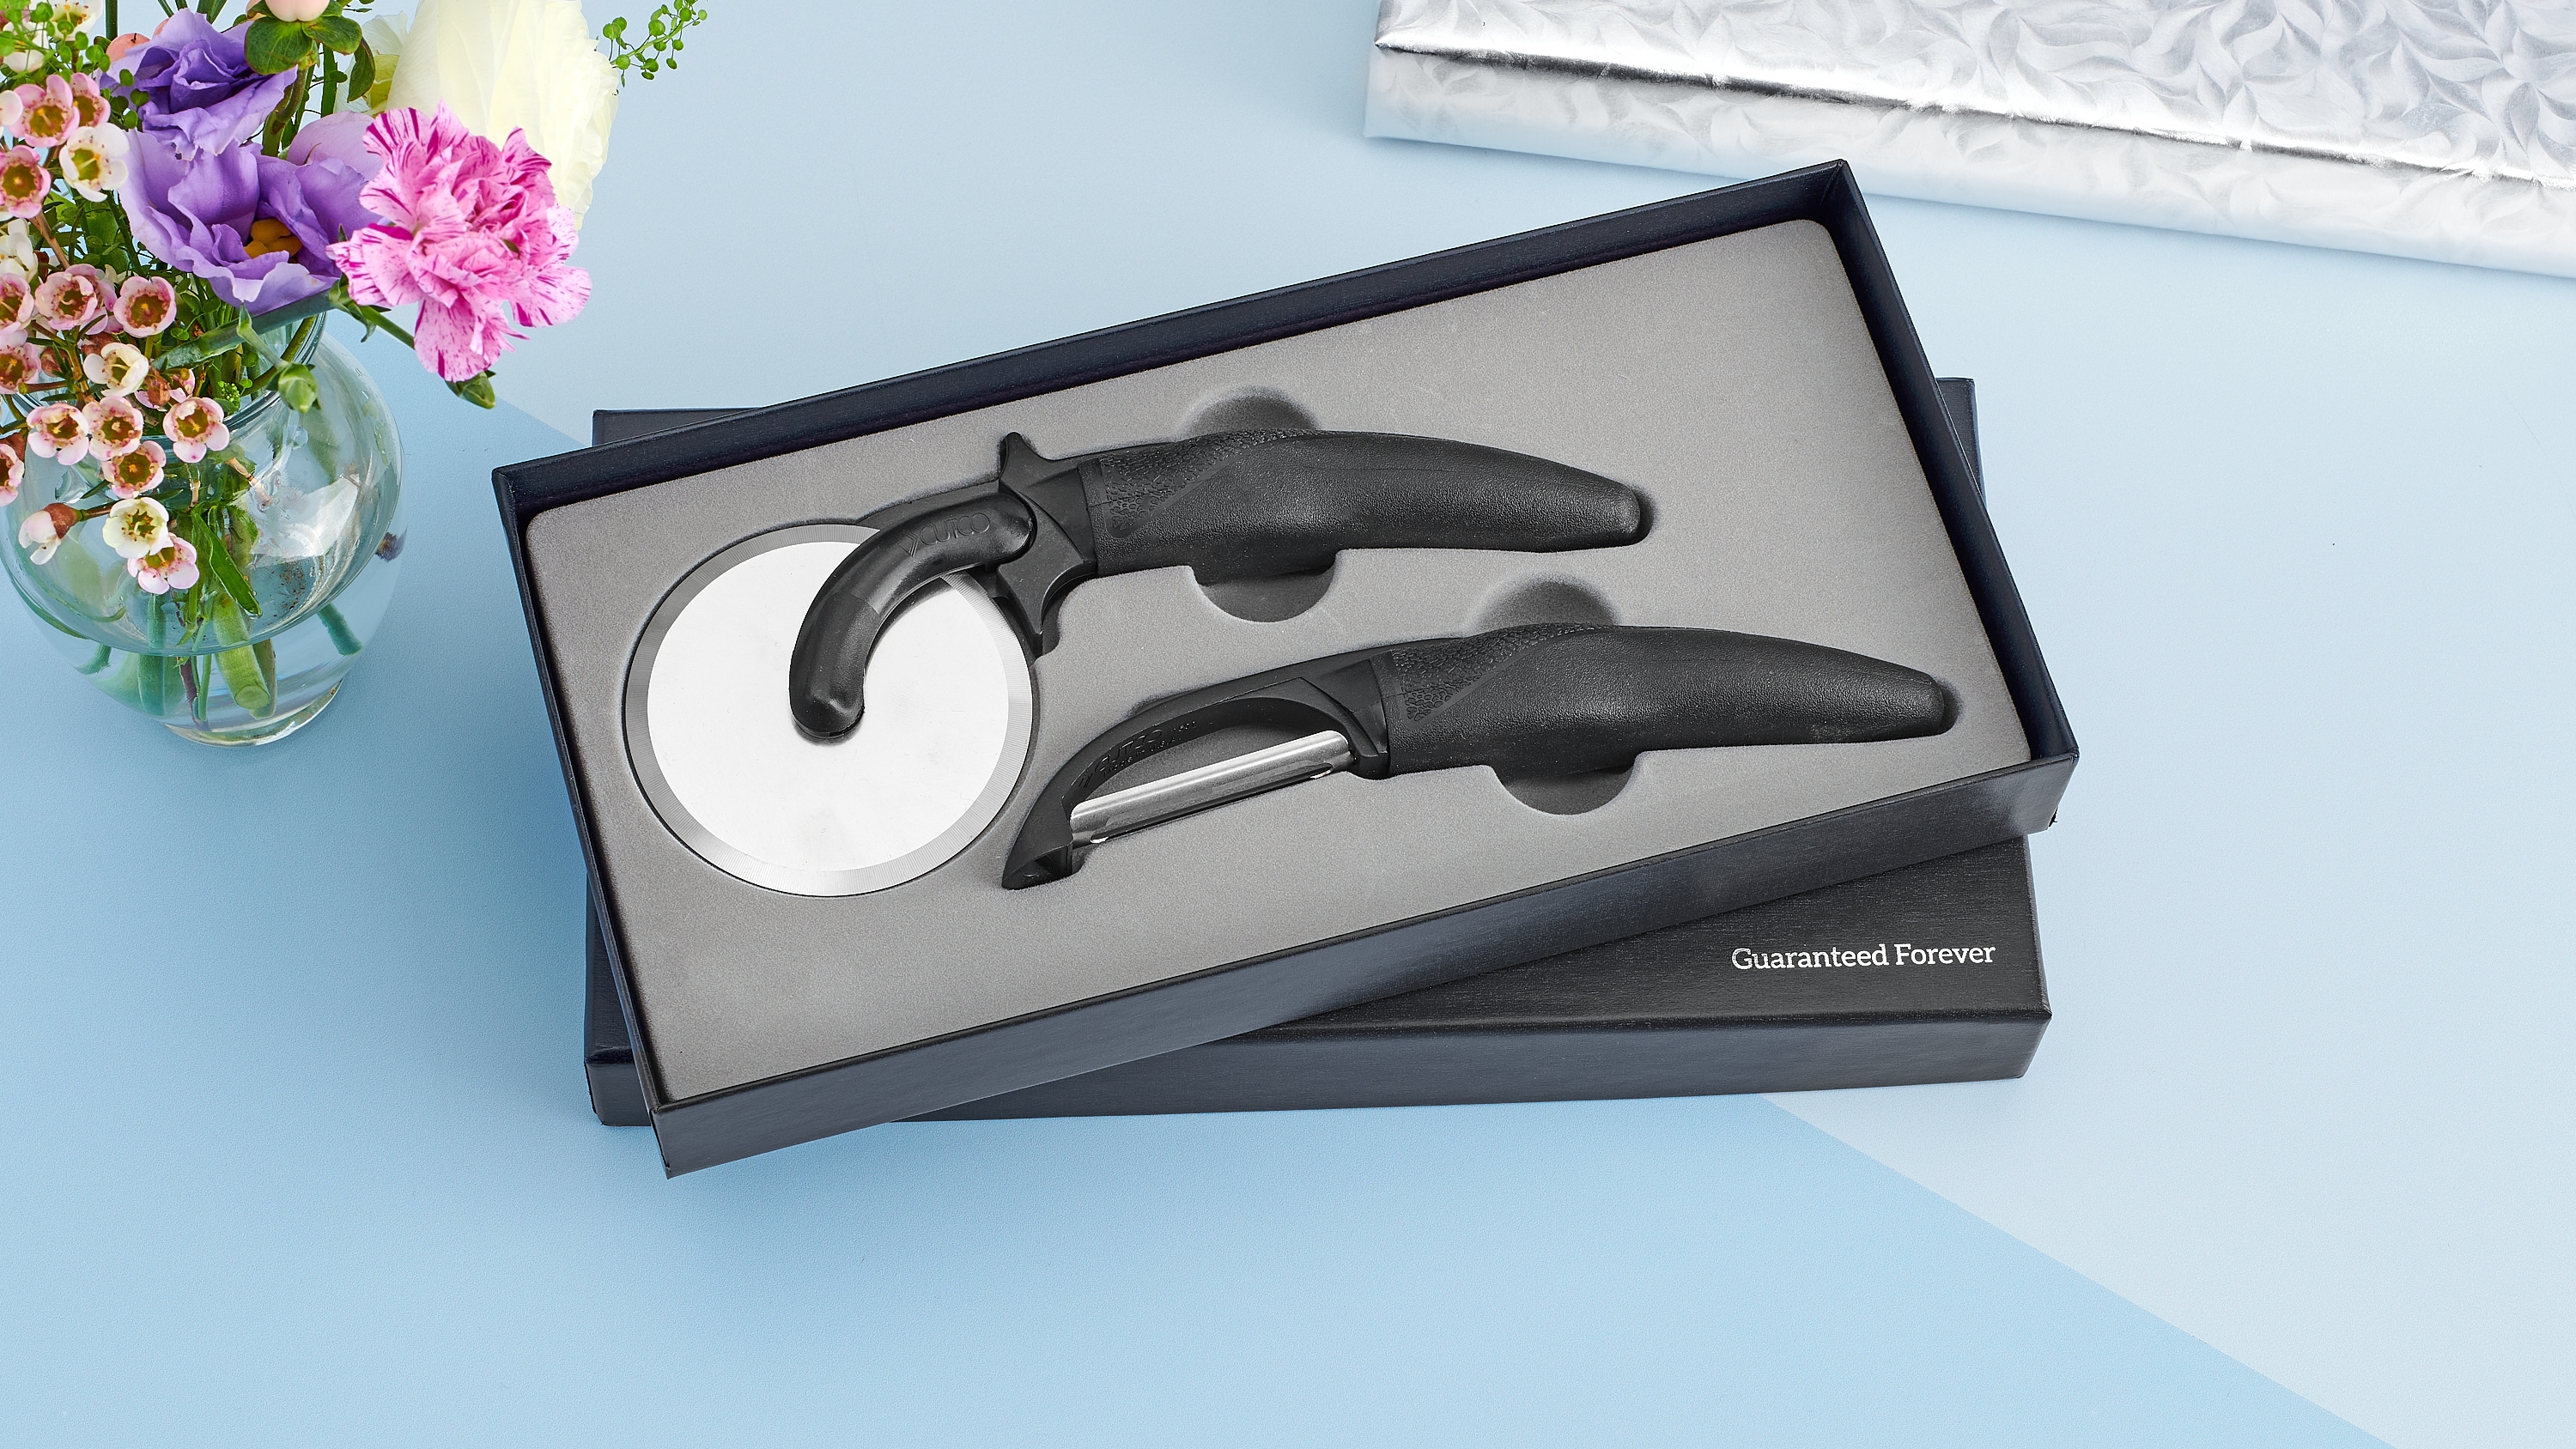 CUTCO Model 1838 Entertainer Set in special CUTCO gift box.   Includes 1501 Peeler, 1502 Pizza Cutter, 1503 Ice Cream Scoop, and 1504  Cheese